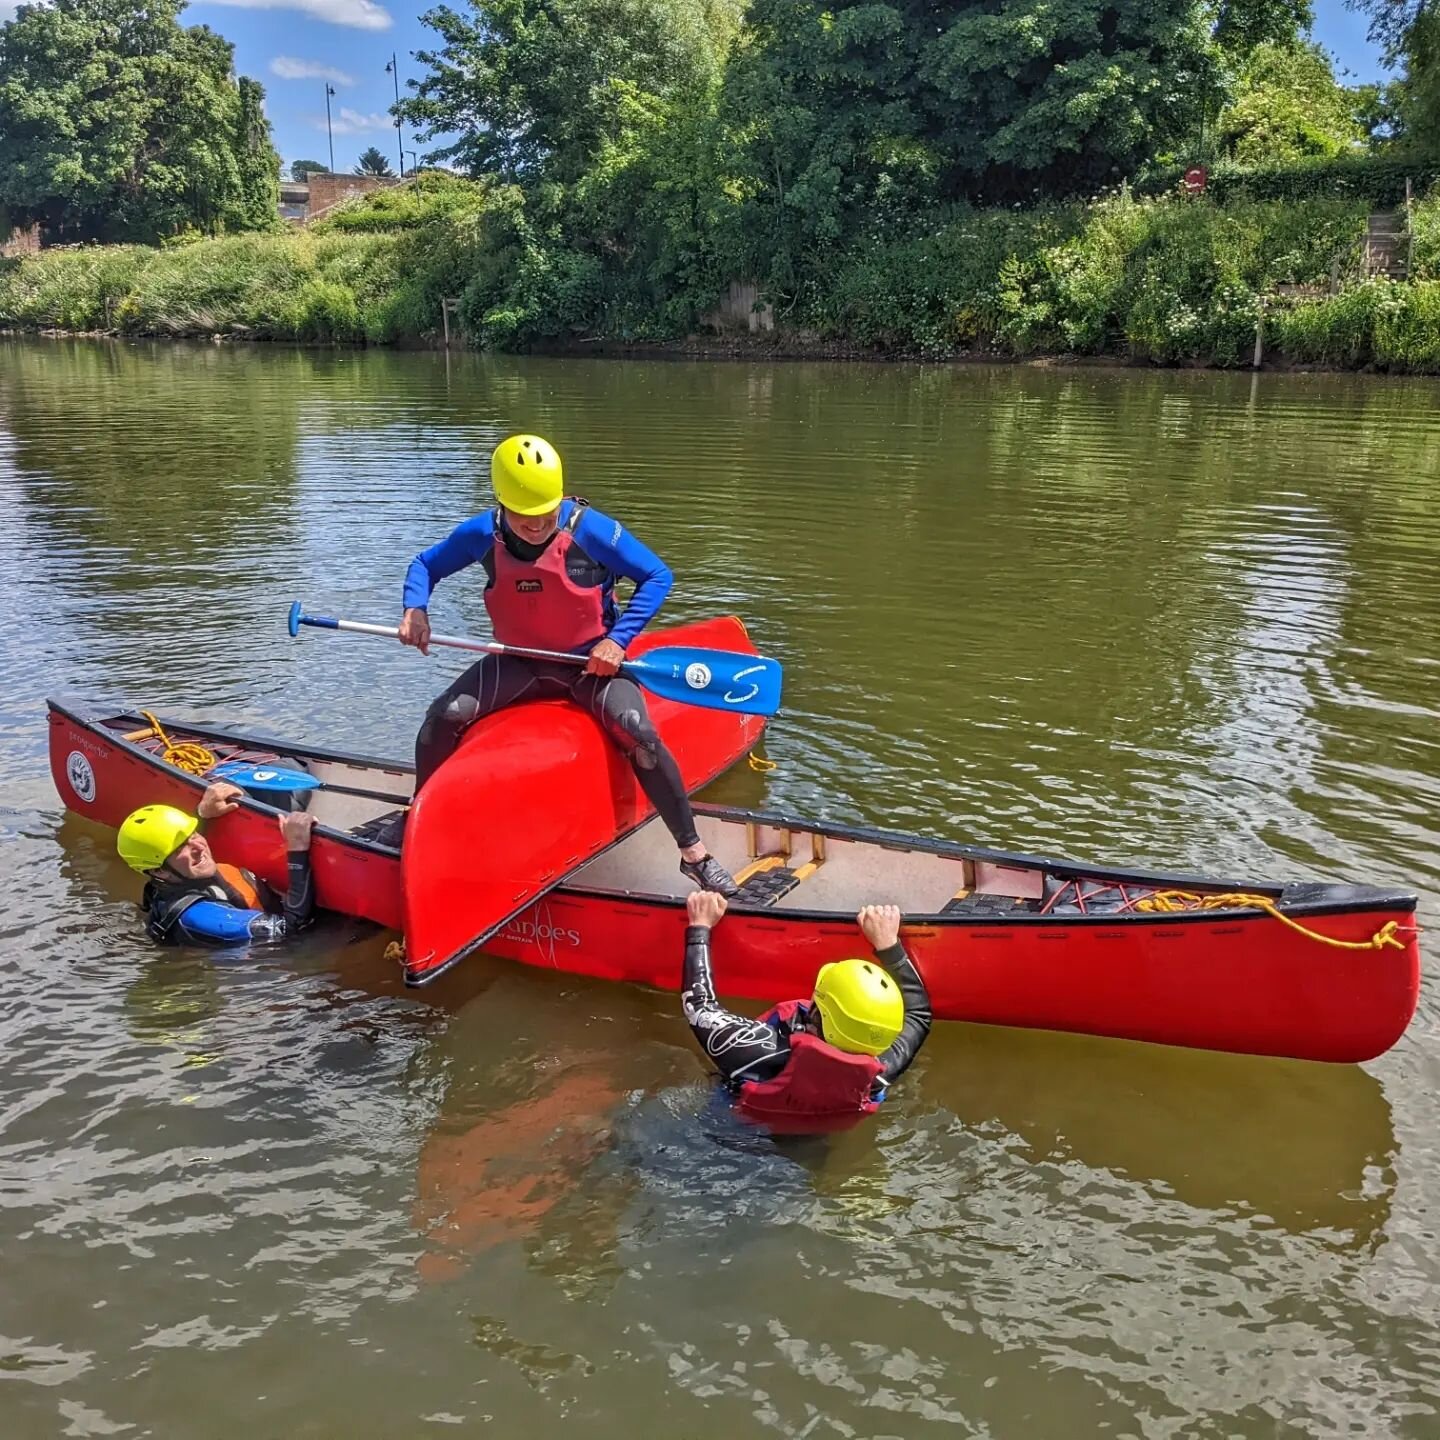 A perfect day for a @british.canoeing Foundation Safety and Rescue training for the guys at Hereford kayak club. Great work team! 
#britishcanoeing #safetyandrescue #sup #kayak #canoe #seakayak #k1 #safetyfirst #herefordkayakclub